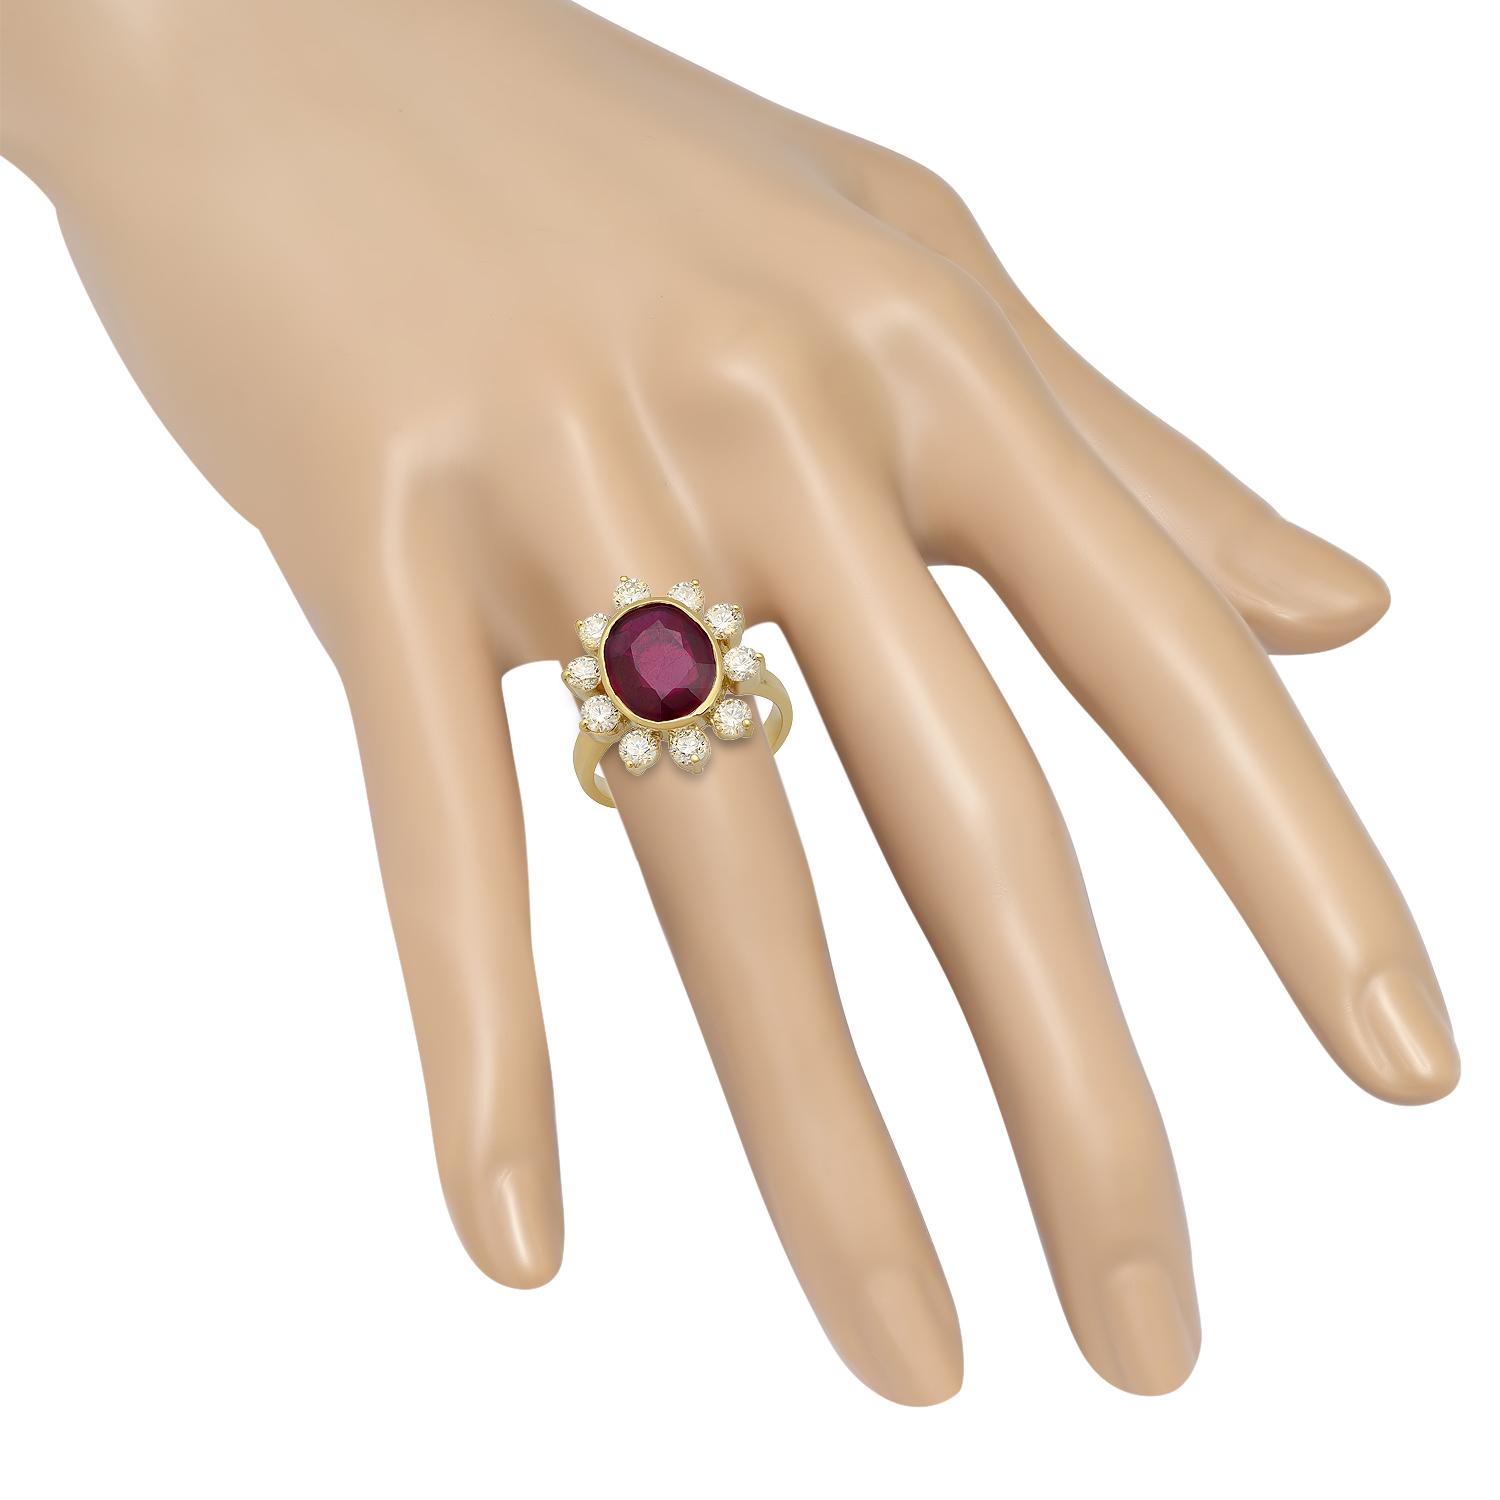 14K Yellow Gold with 7.50ct Ruby and 1.58ct Diamond Ring